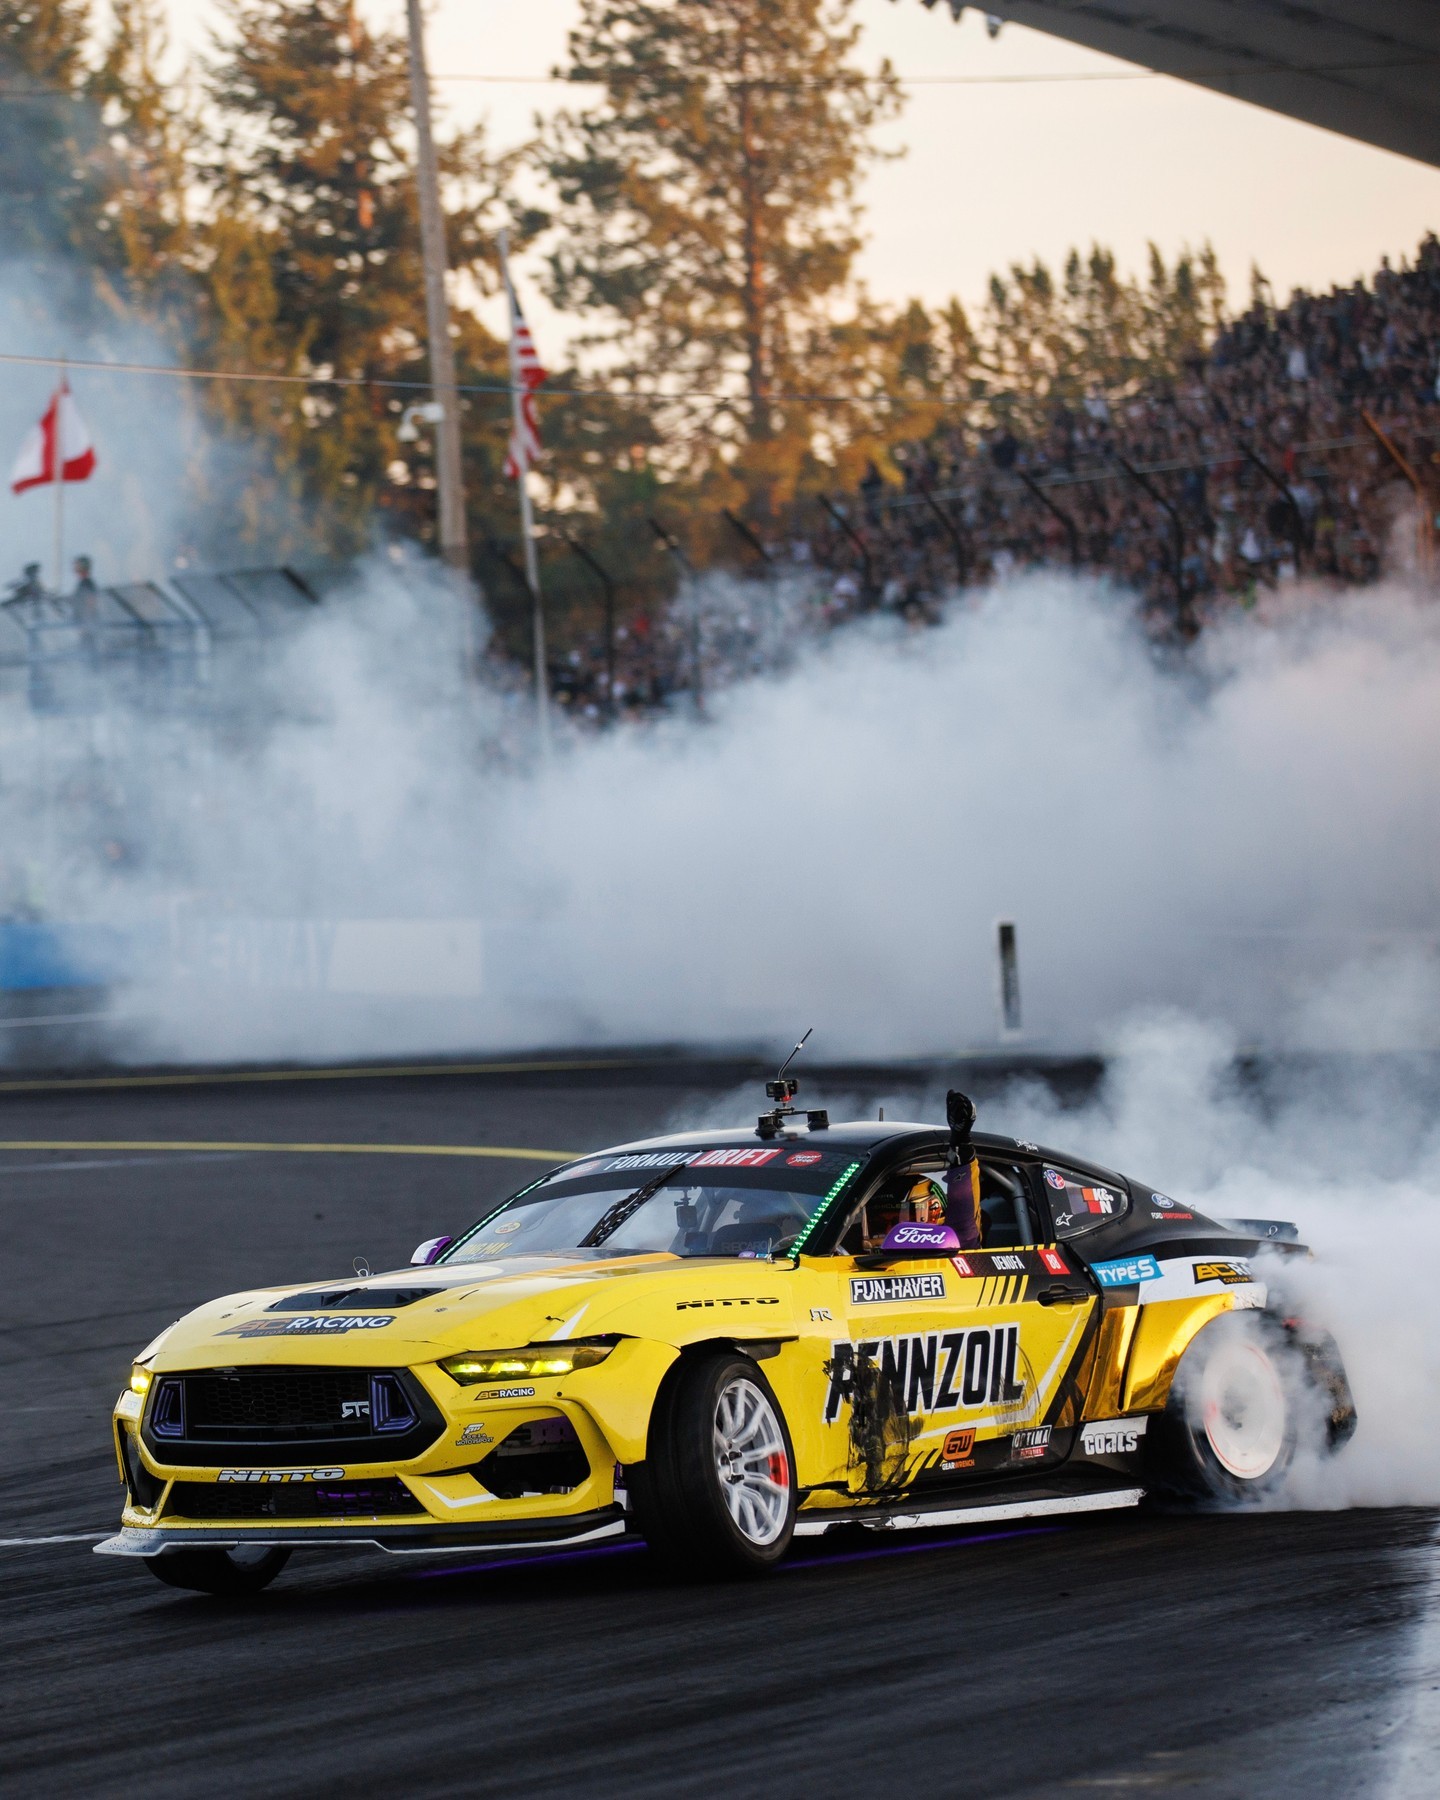 Ruling the tracks and our hearts. Well done, @ChelseaDeNofa | @BCRacingNA!

3 years in a row at #FDSEA!